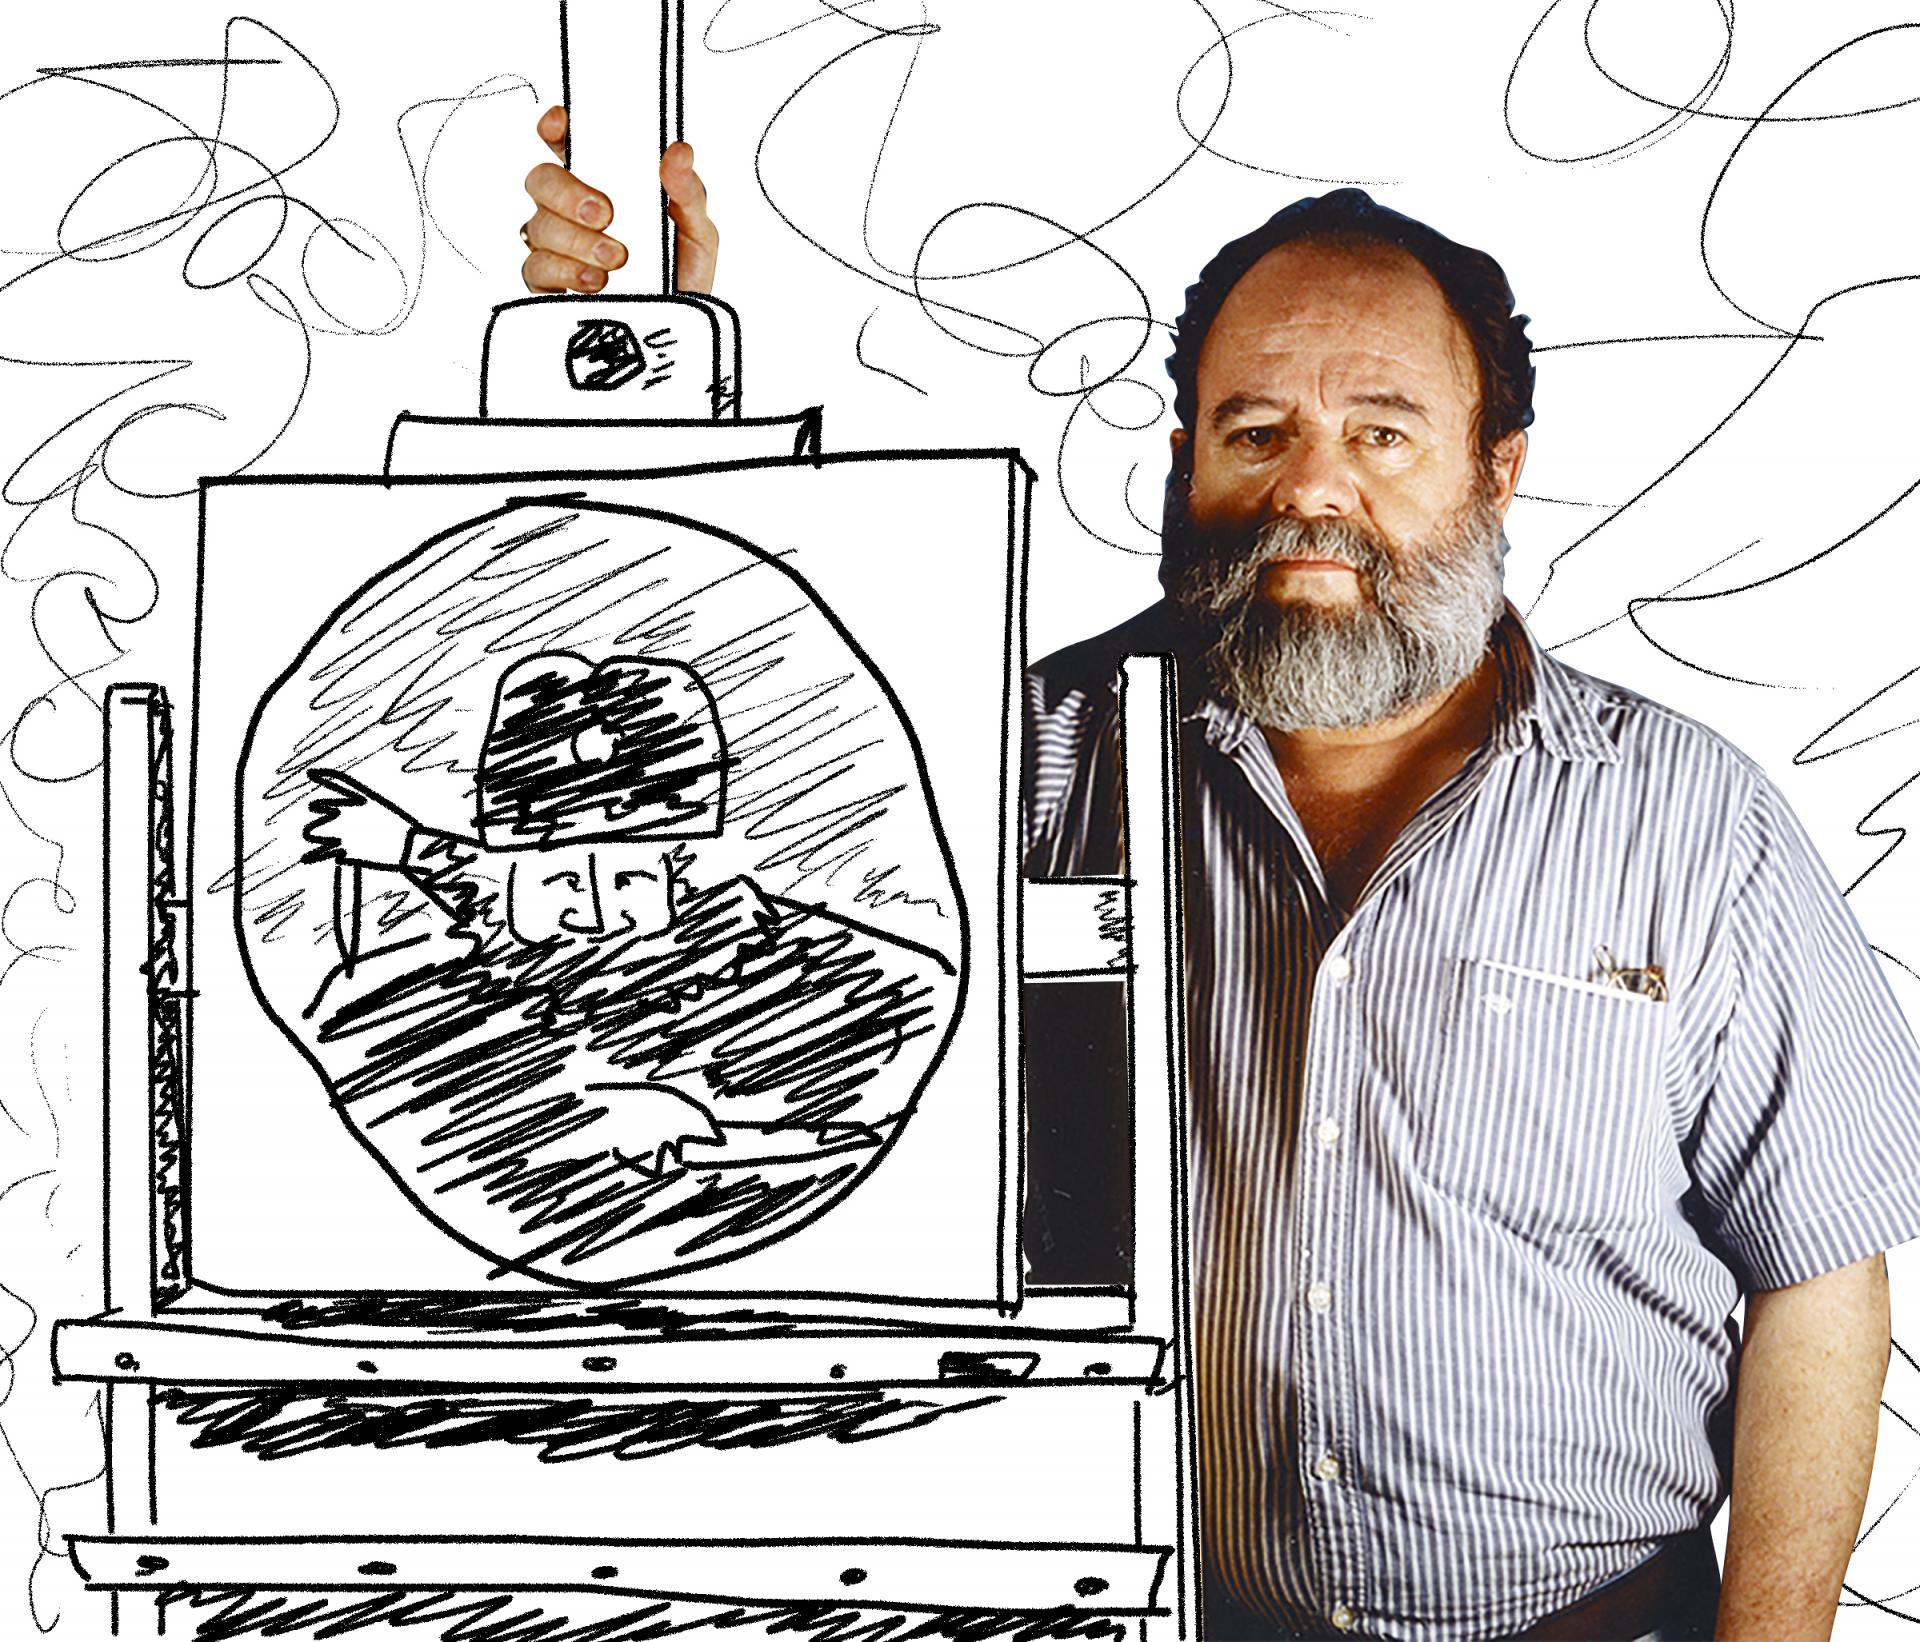 Alfredo Castañeda stands next to an easel with his painting on it